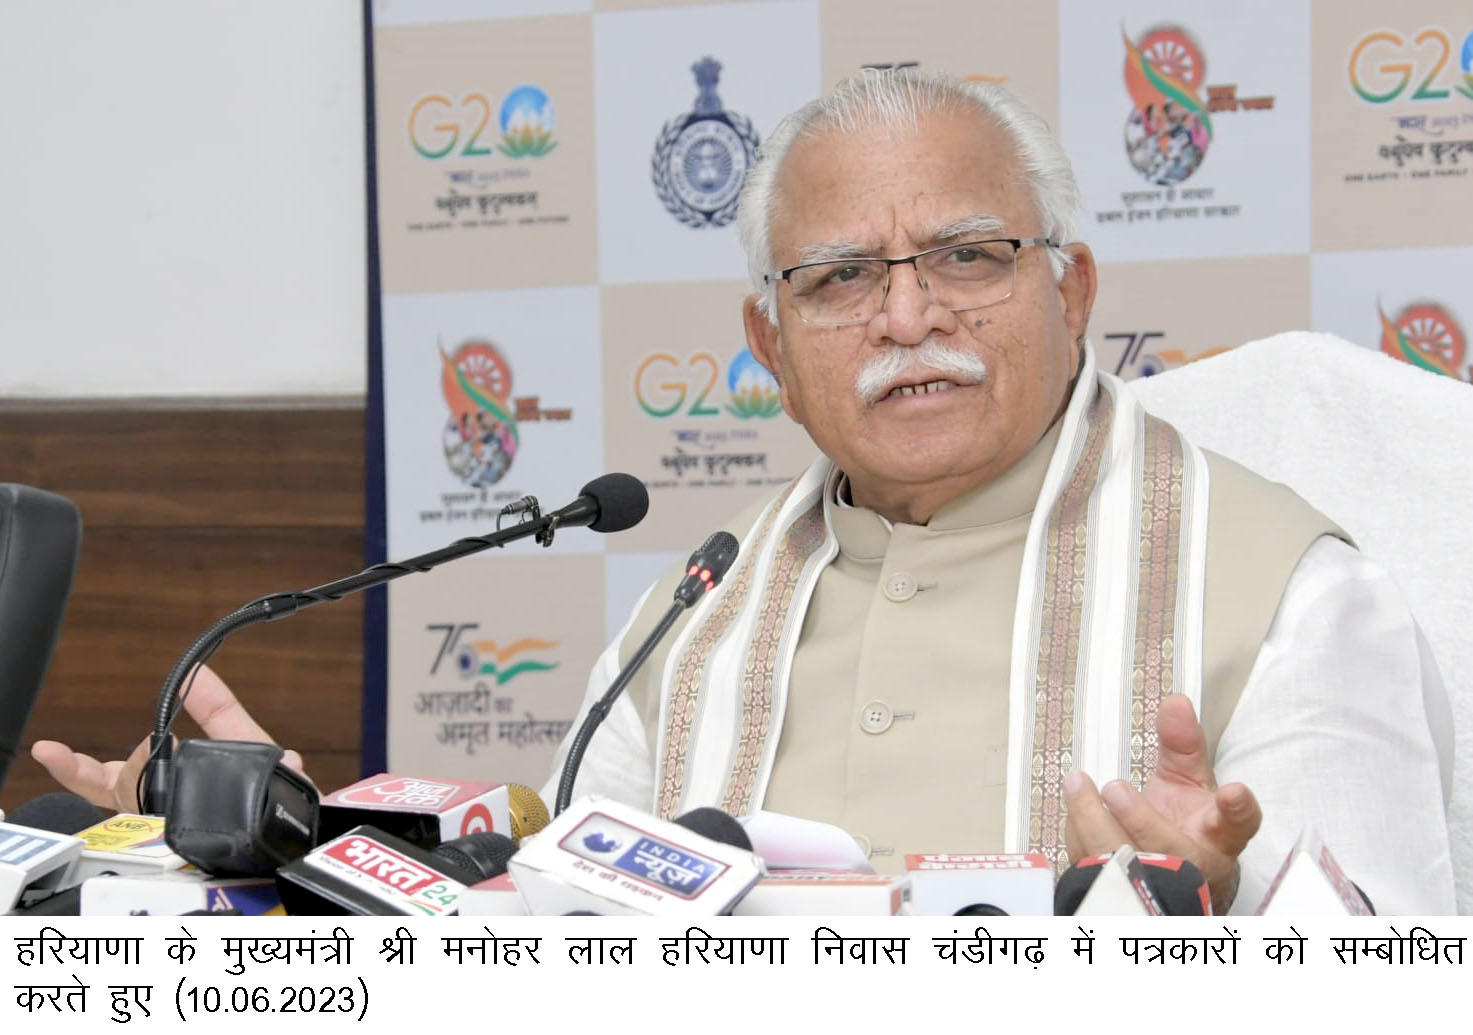 Some unions, political leaders defaming farmers by misleading them: Khattar